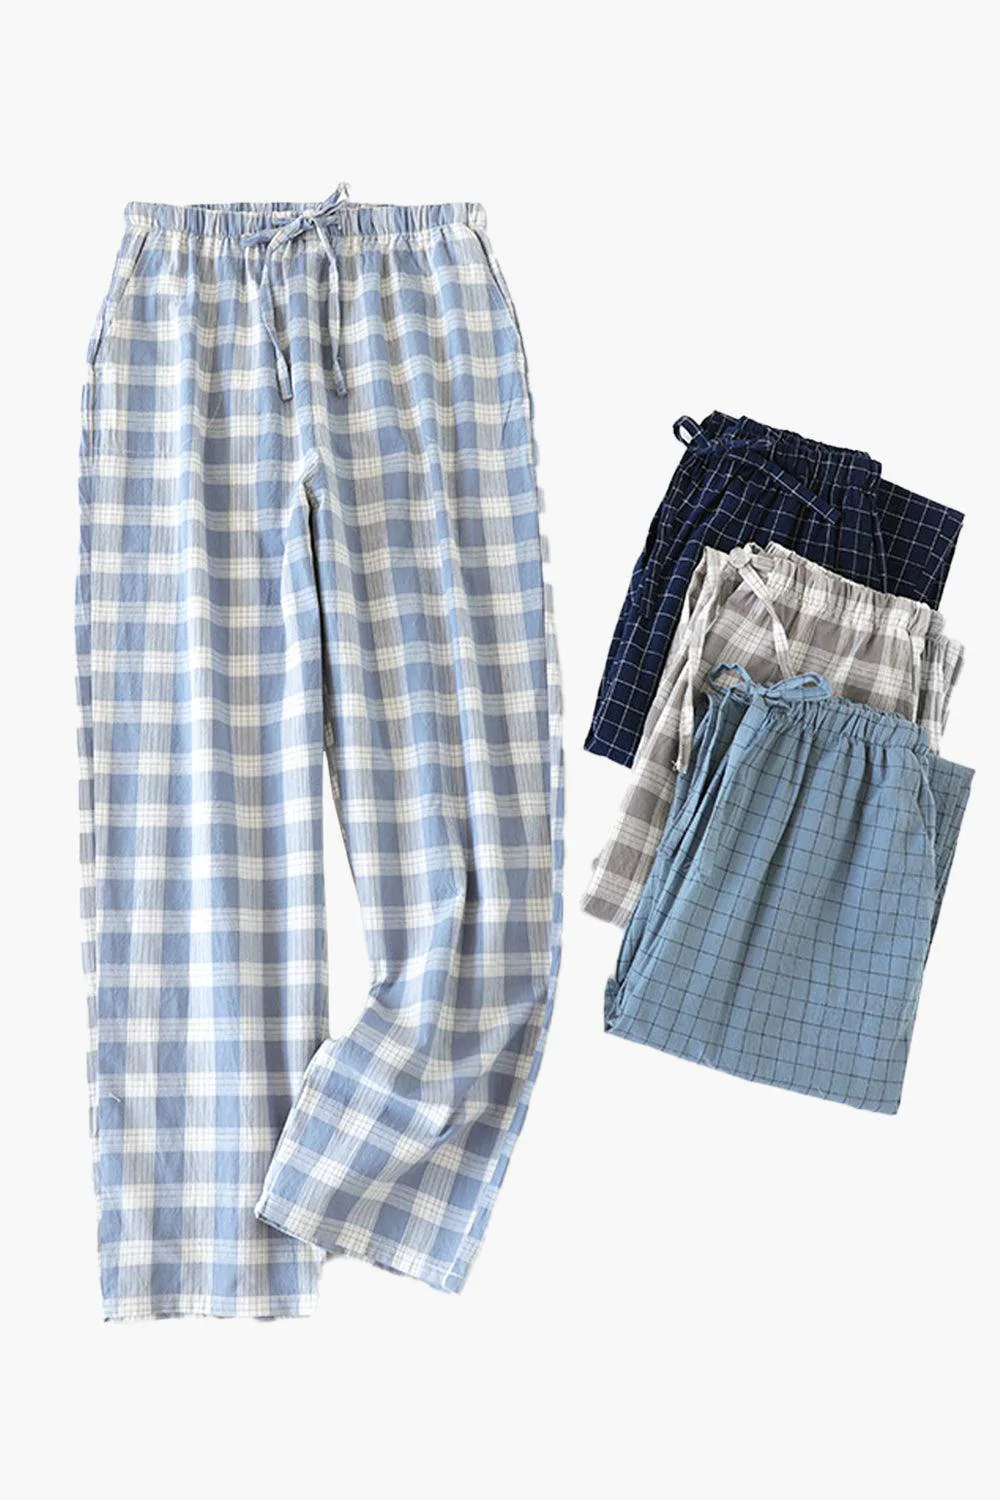 How to Style Plaid Pajama Pants: Outfits for Looking Good at Home for Ladies